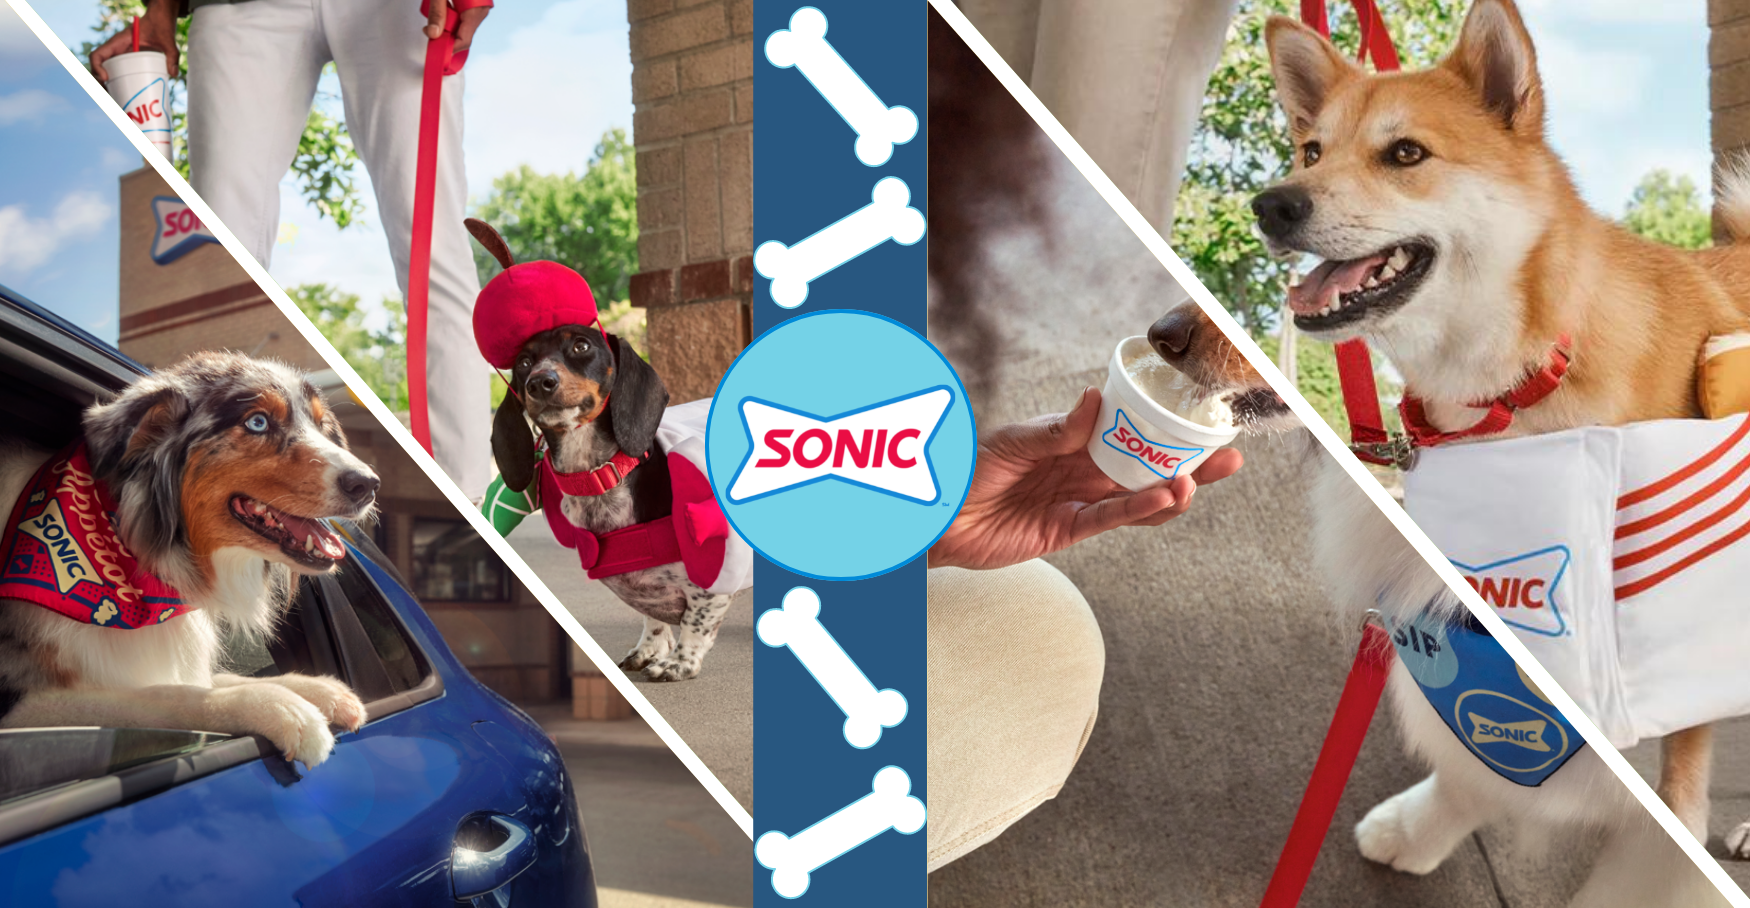 Sonic Launches Collection of Merch for Dogs - QSR Magazine